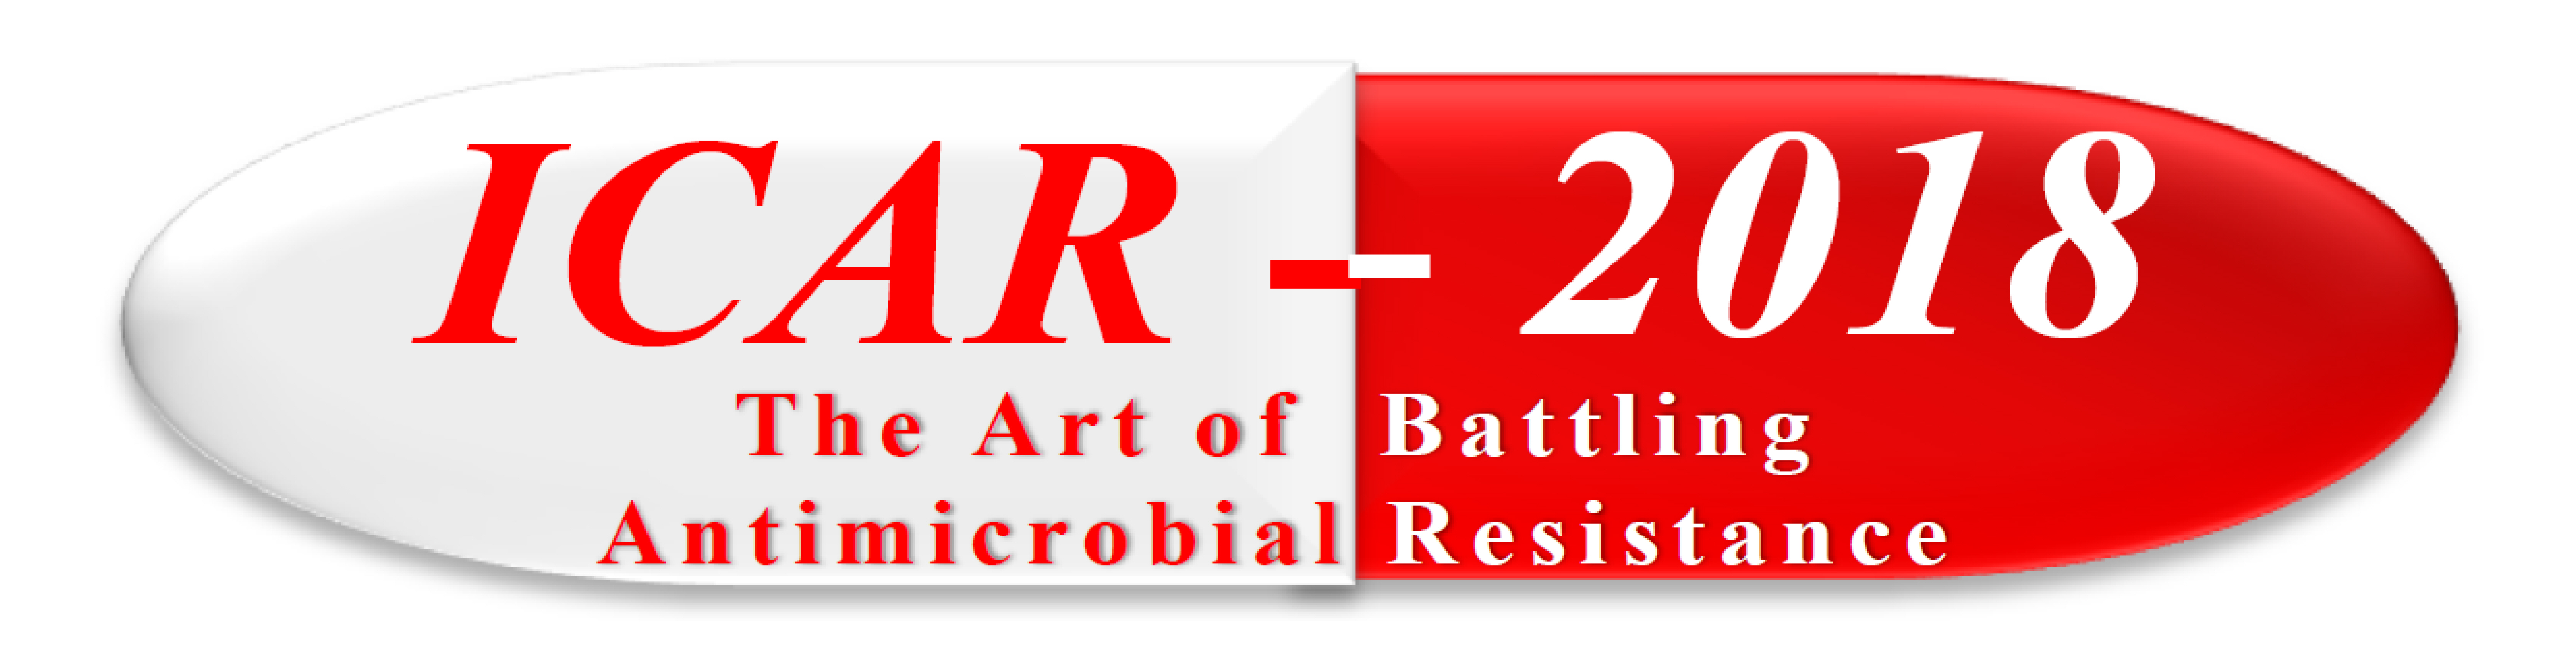 International Conference on Antimicrobial Resistance (ICAR - 2018)